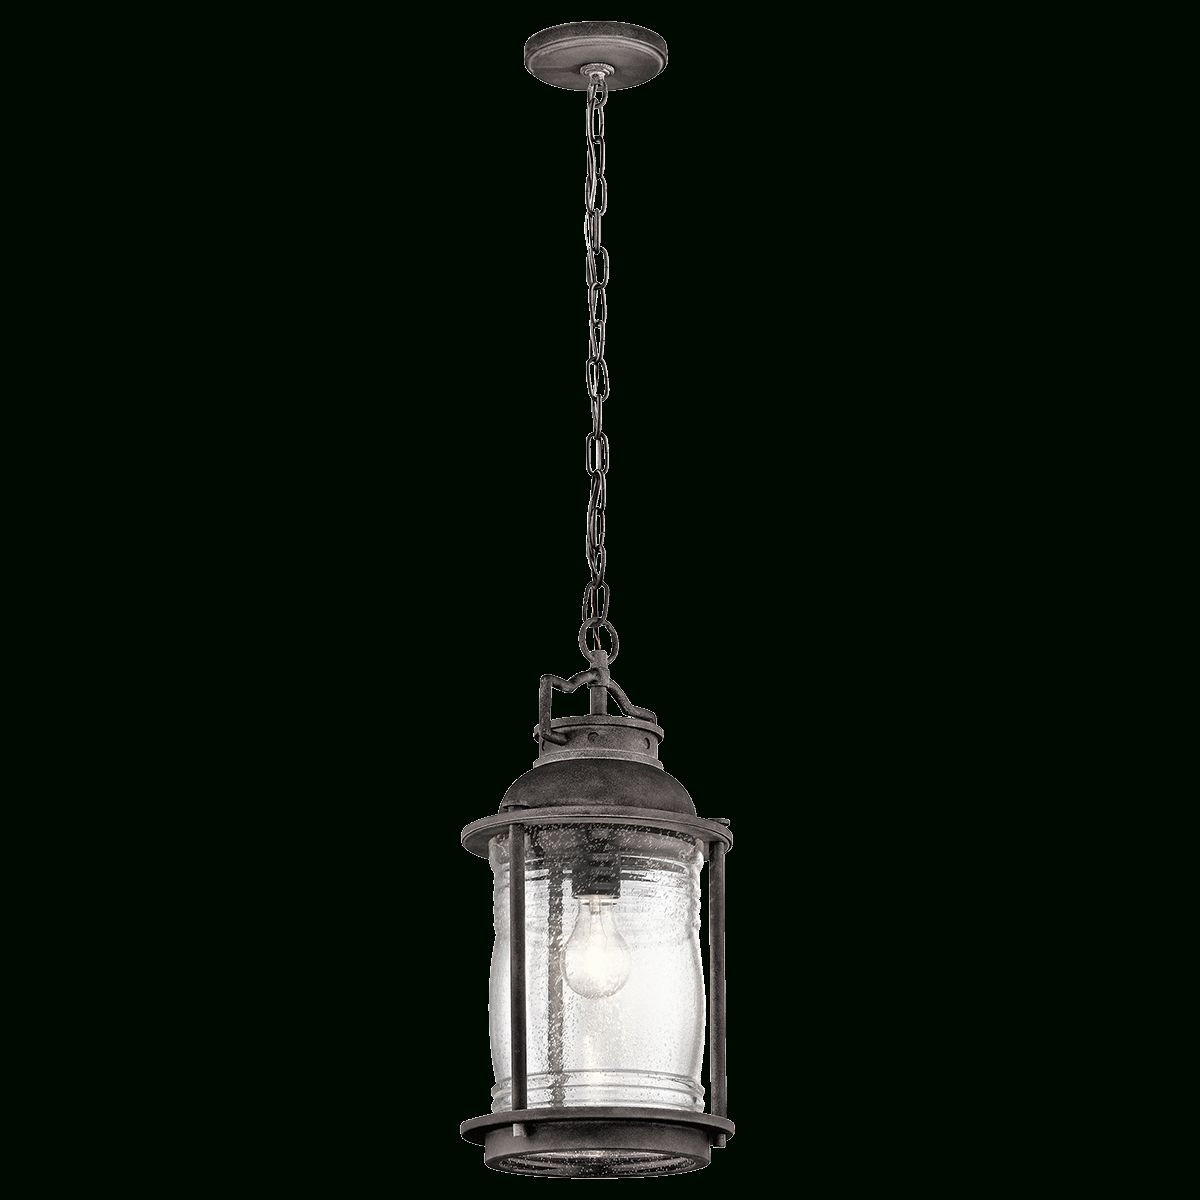 Ashland Bay 1 Light Outdoor Pendant – Wzc 49572wzc Kichler Within Kichler Outdoor Ceiling Lights (View 13 of 15)